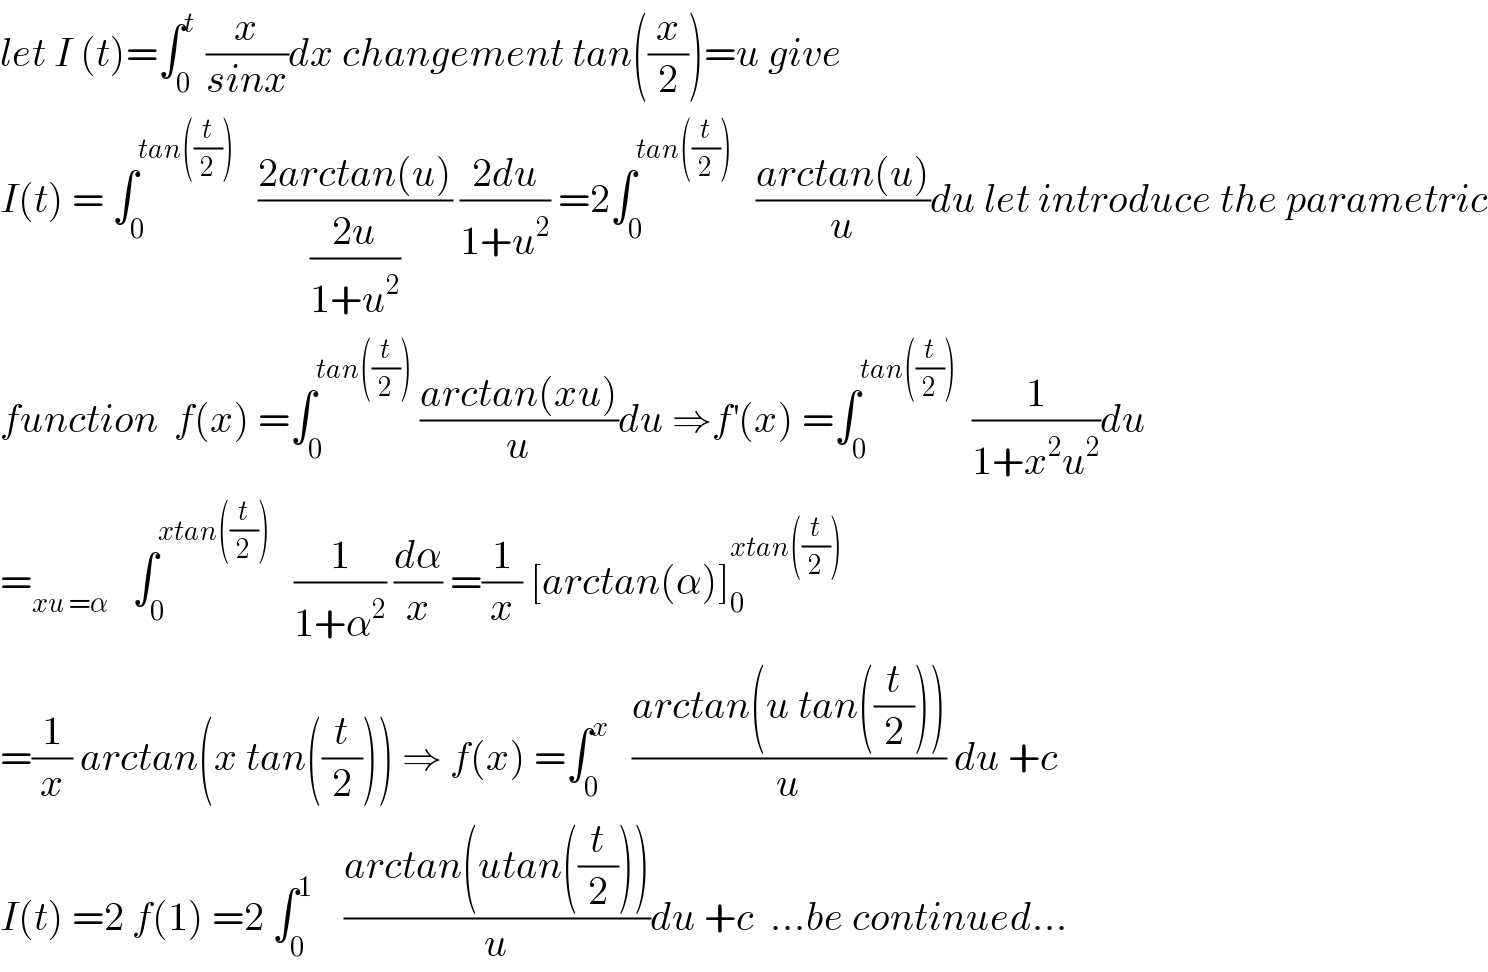 let I (t)=∫_0 ^t  (x/(sinx))dx changement tan((x/2))=u give  I(t) = ∫_0 ^(tan((t/2)))    ((2arctan(u))/((2u)/(1+u^2 ))) ((2du)/(1+u^2 )) =2∫_0 ^(tan((t/2)))    ((arctan(u))/u)du let introduce the parametric  function  f(x) =∫_0 ^(tan((t/2)))  ((arctan(xu))/u)du ⇒f^′ (x) =∫_0 ^(tan((t/2)))   (1/(1+x^2 u^2 ))du  =_(xu =α)    ∫_0 ^(xtan((t/2)))    (1/(1+α^2 )) (dα/x) =(1/x) [arctan(α)]_0 ^(xtan((t/2)))   =(1/x) arctan(x tan((t/2))) ⇒ f(x) =∫_0 ^x    ((arctan(u tan((t/2))))/u) du +c  I(t) =2 f(1) =2 ∫_0 ^1     ((arctan(utan((t/2))))/u)du +c  ...be continued...  